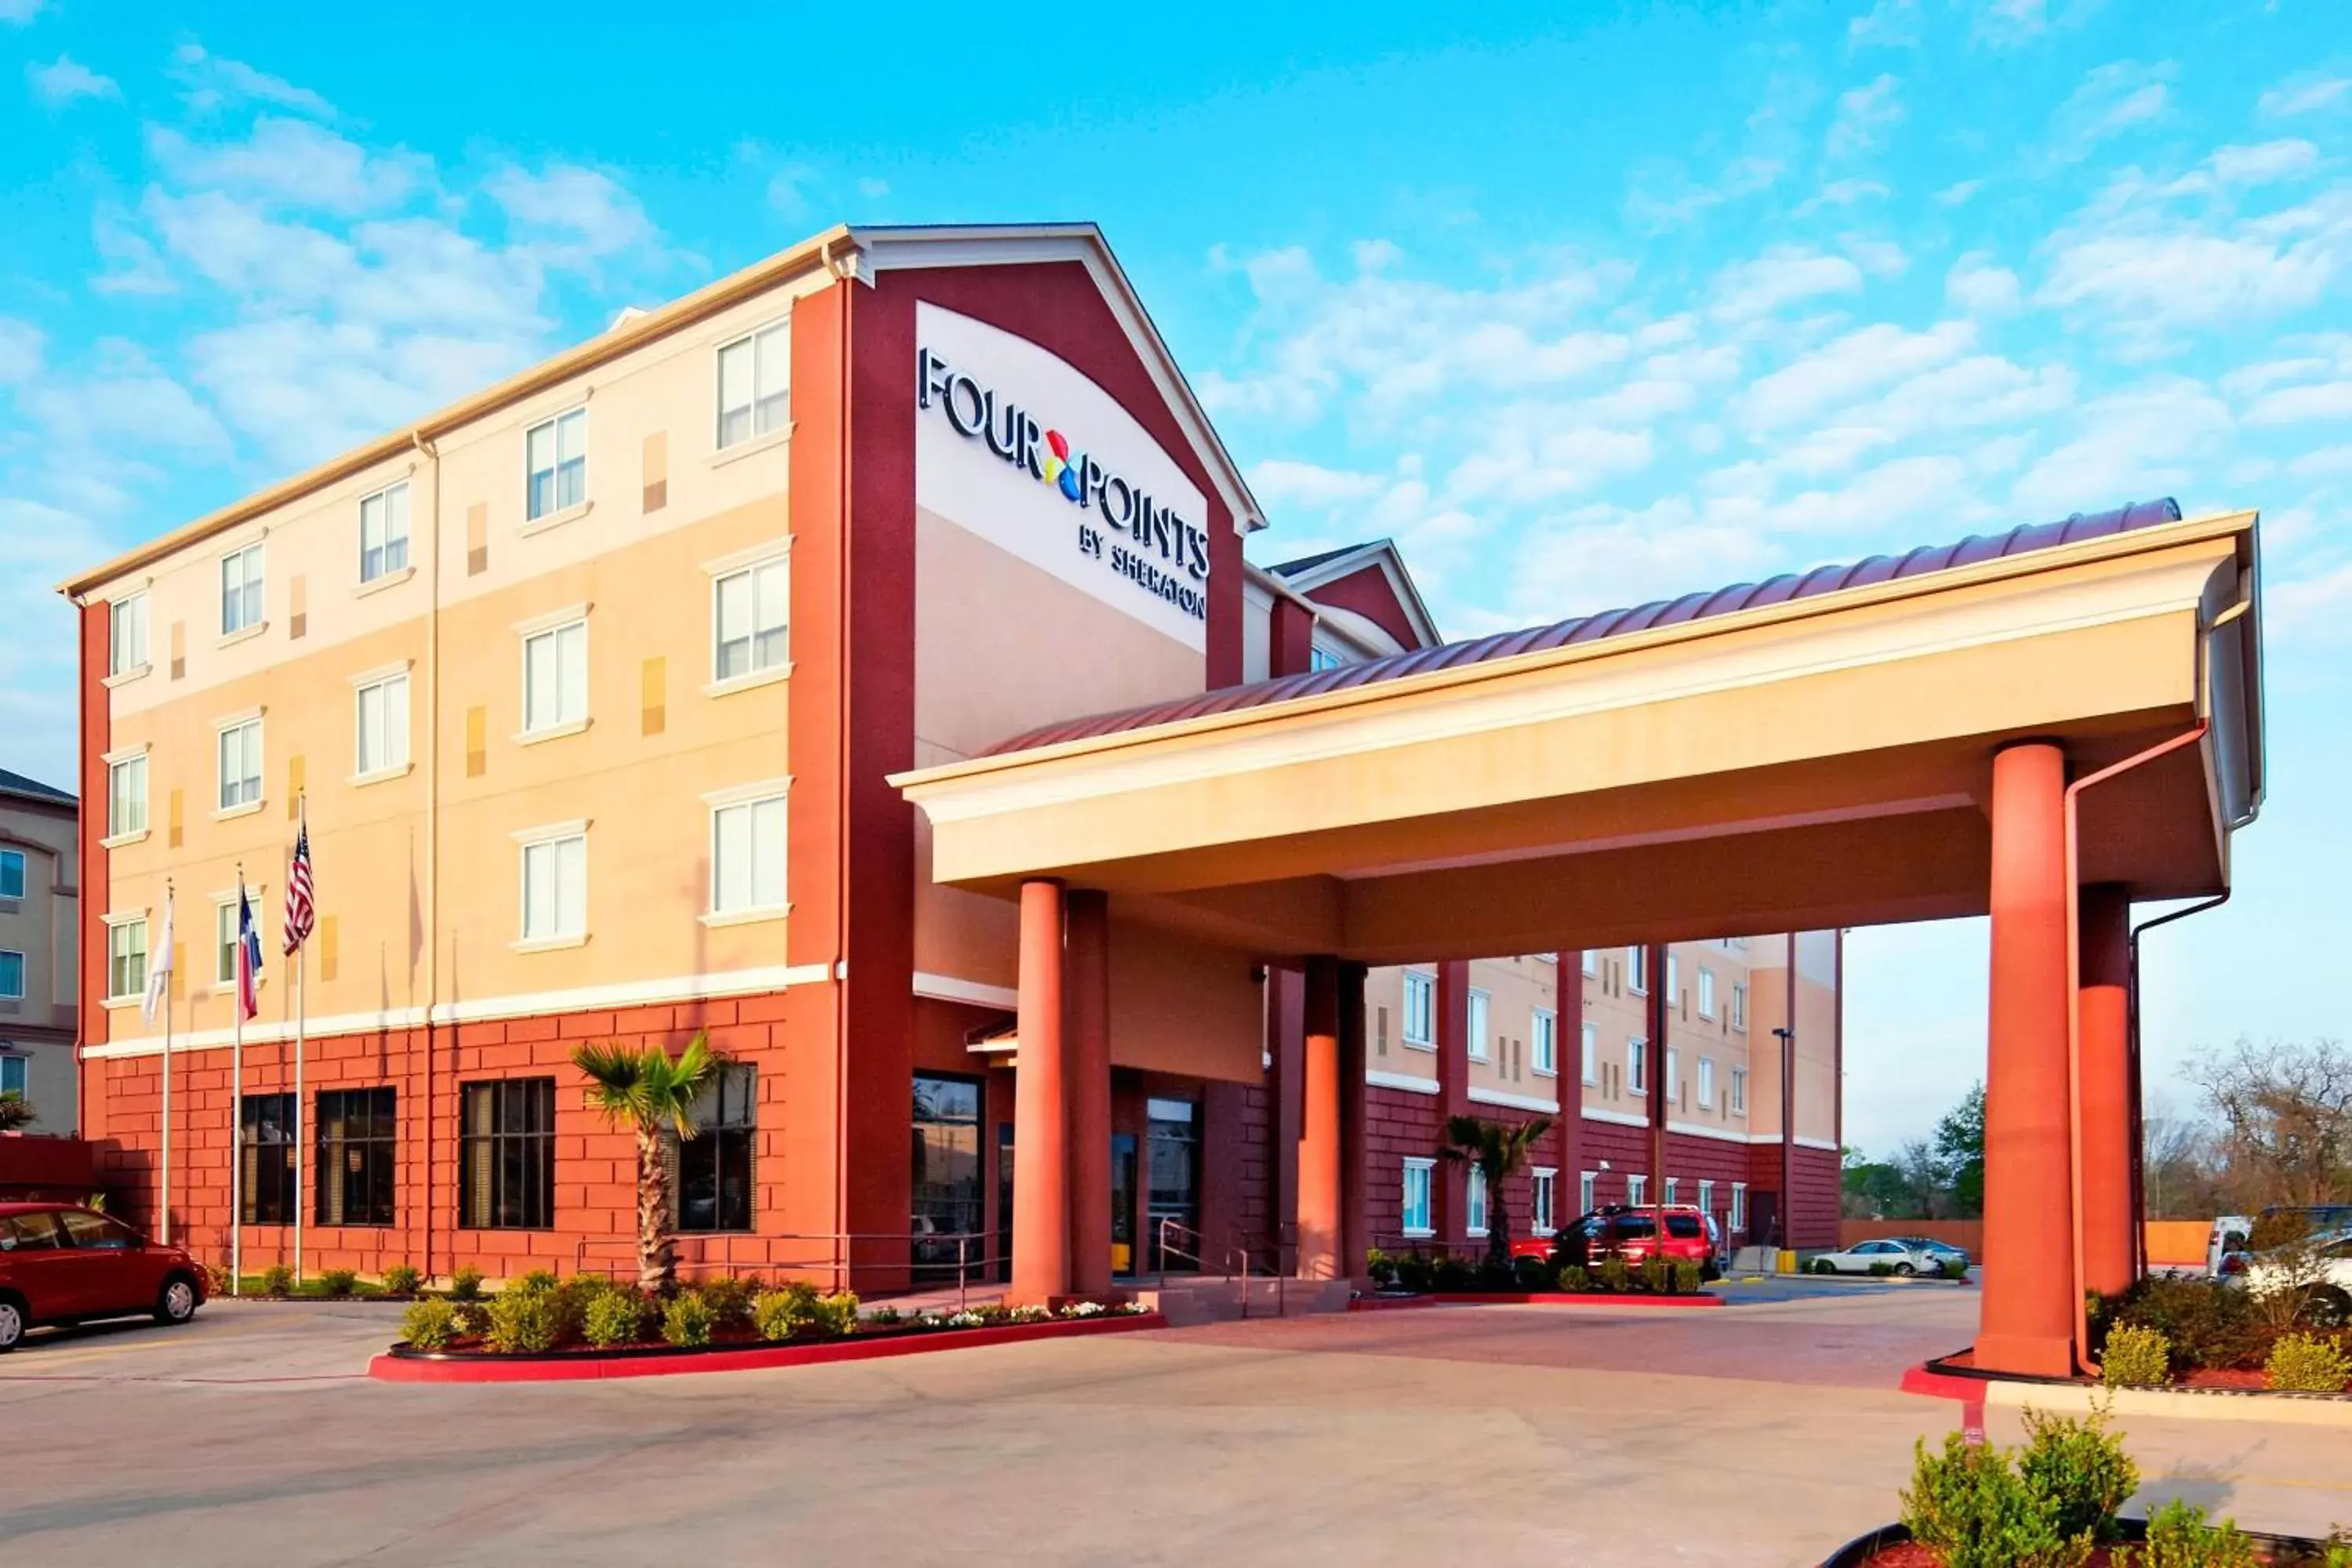 Property Building in Four Points by Sheraton Houston Hobby Airport